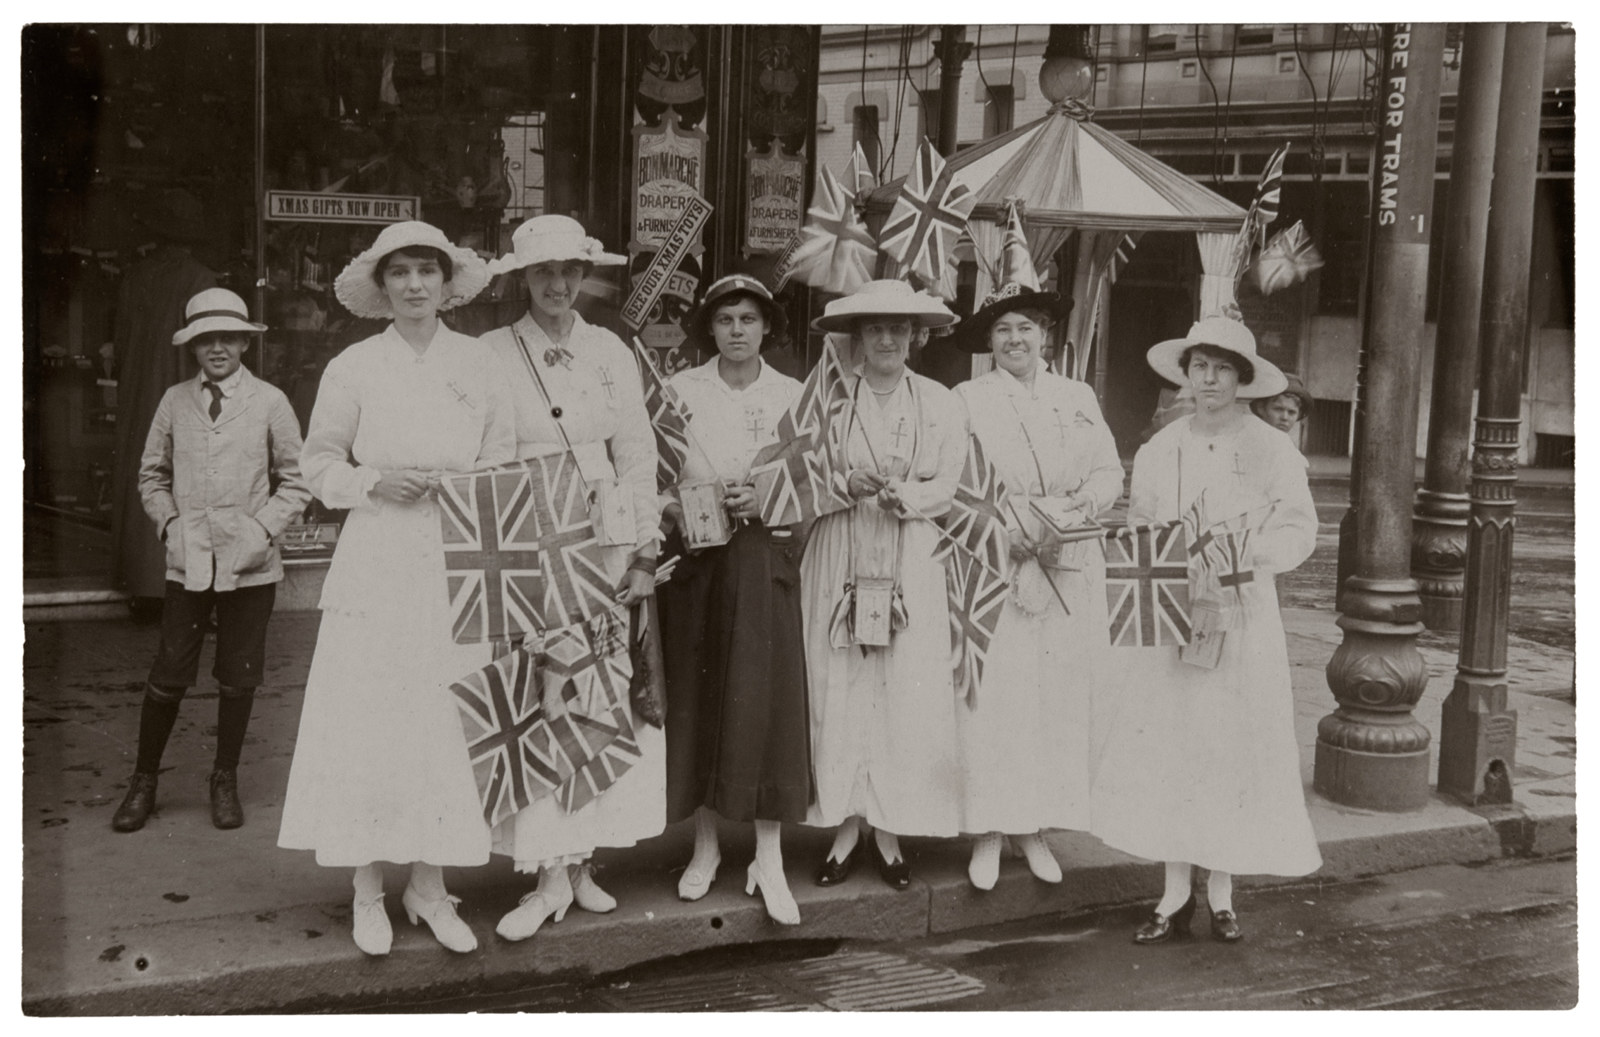 Women collectors outside the Bon Marche department store in George Street, Sydney during World War 1, fundraising for the British Red Cross 'Our Day' appeal, 30 November 1917 / W. Payne Fulton, Oakleigh Studio